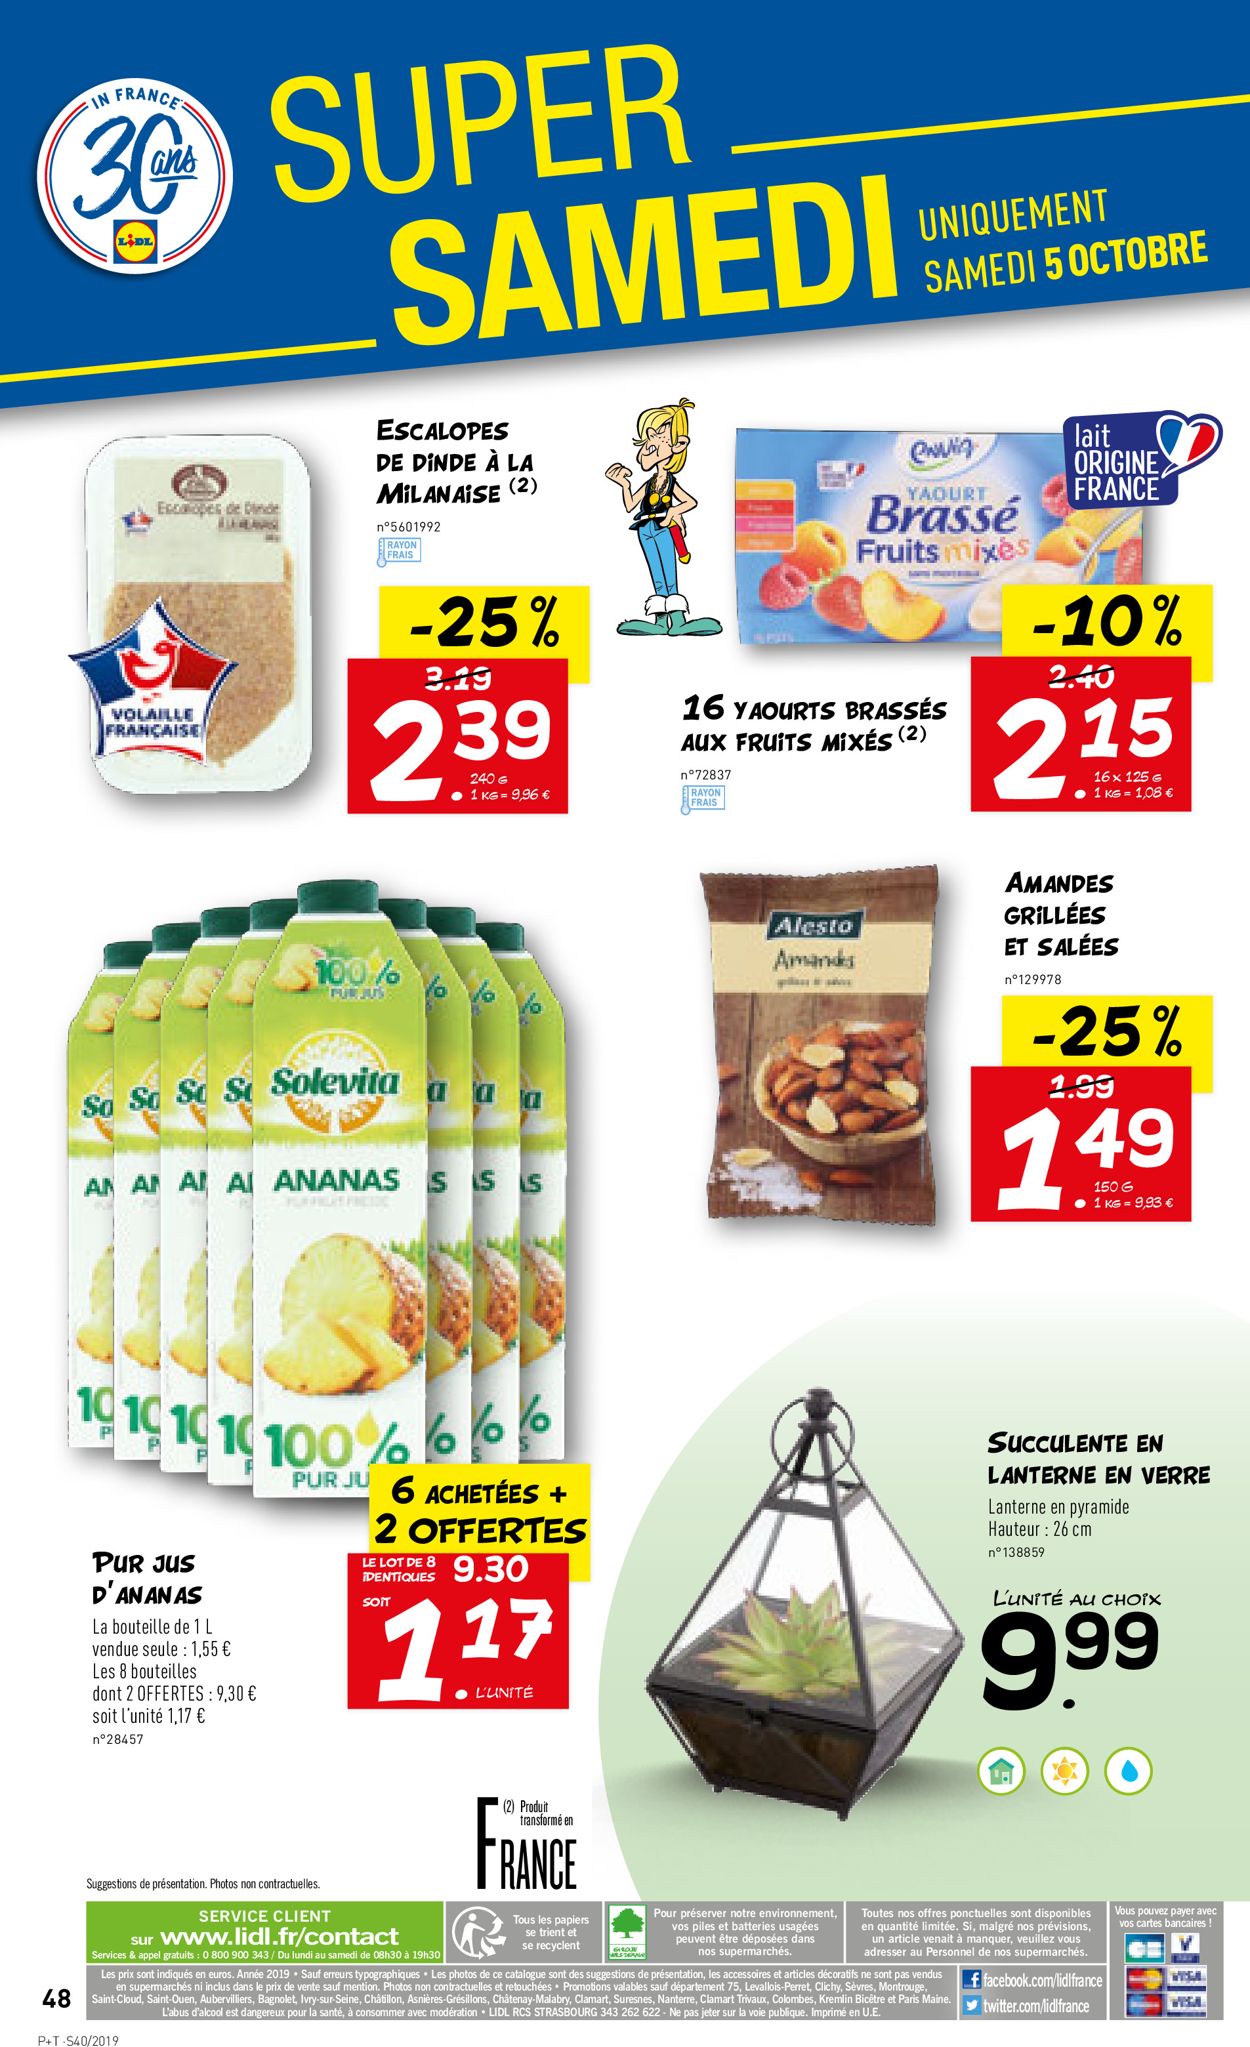 Lidl Catalogue - 02.10-08.10.2019 (Page 48)